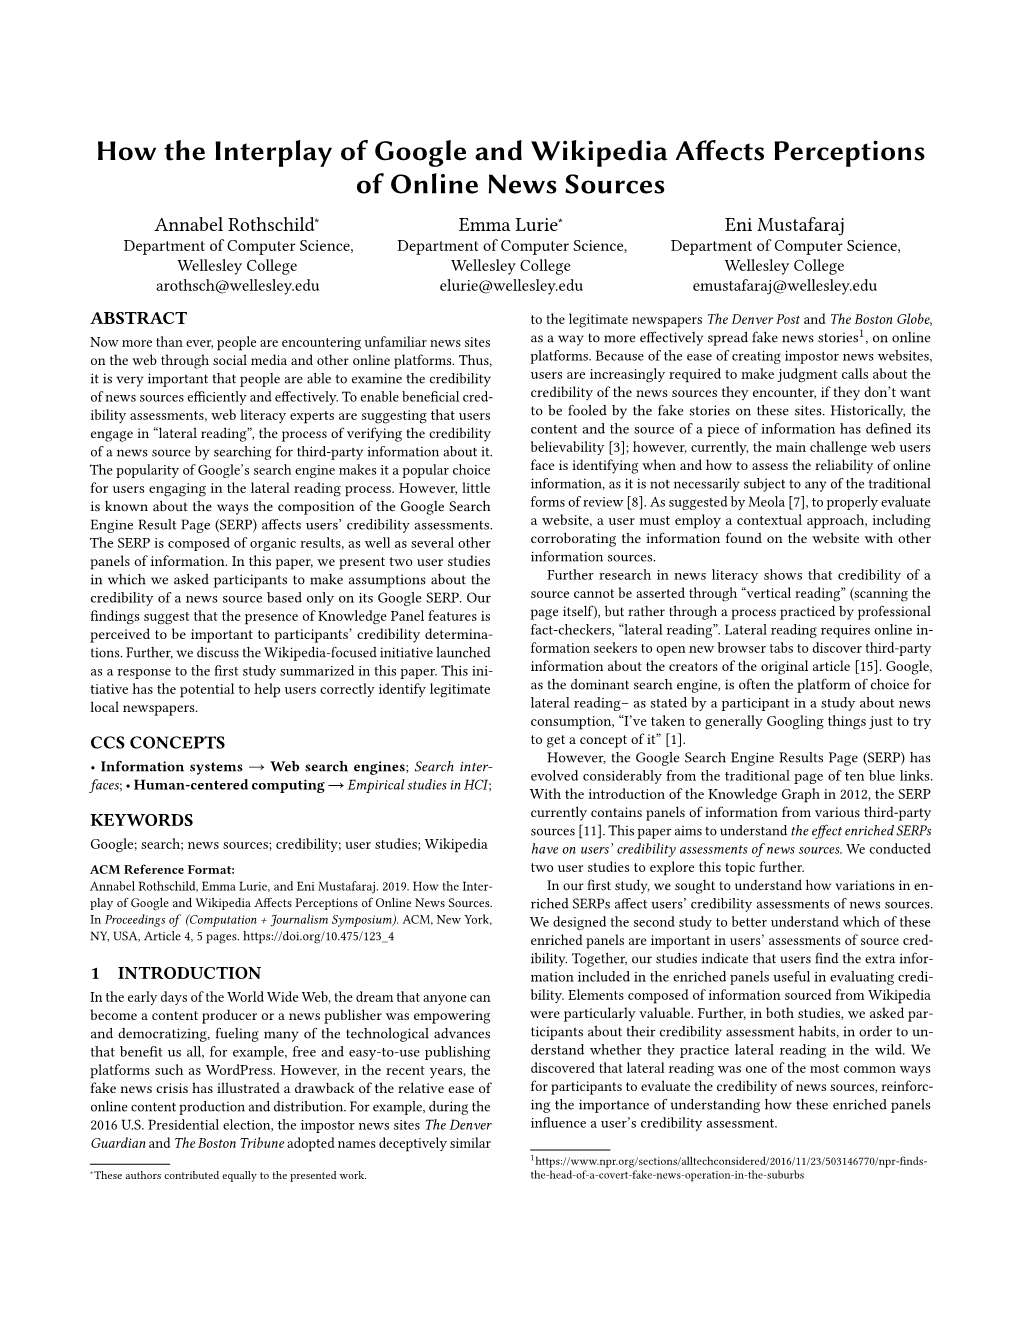 How the Interplay of Google and Wikipedia Affects Perceptions of Online News Sources